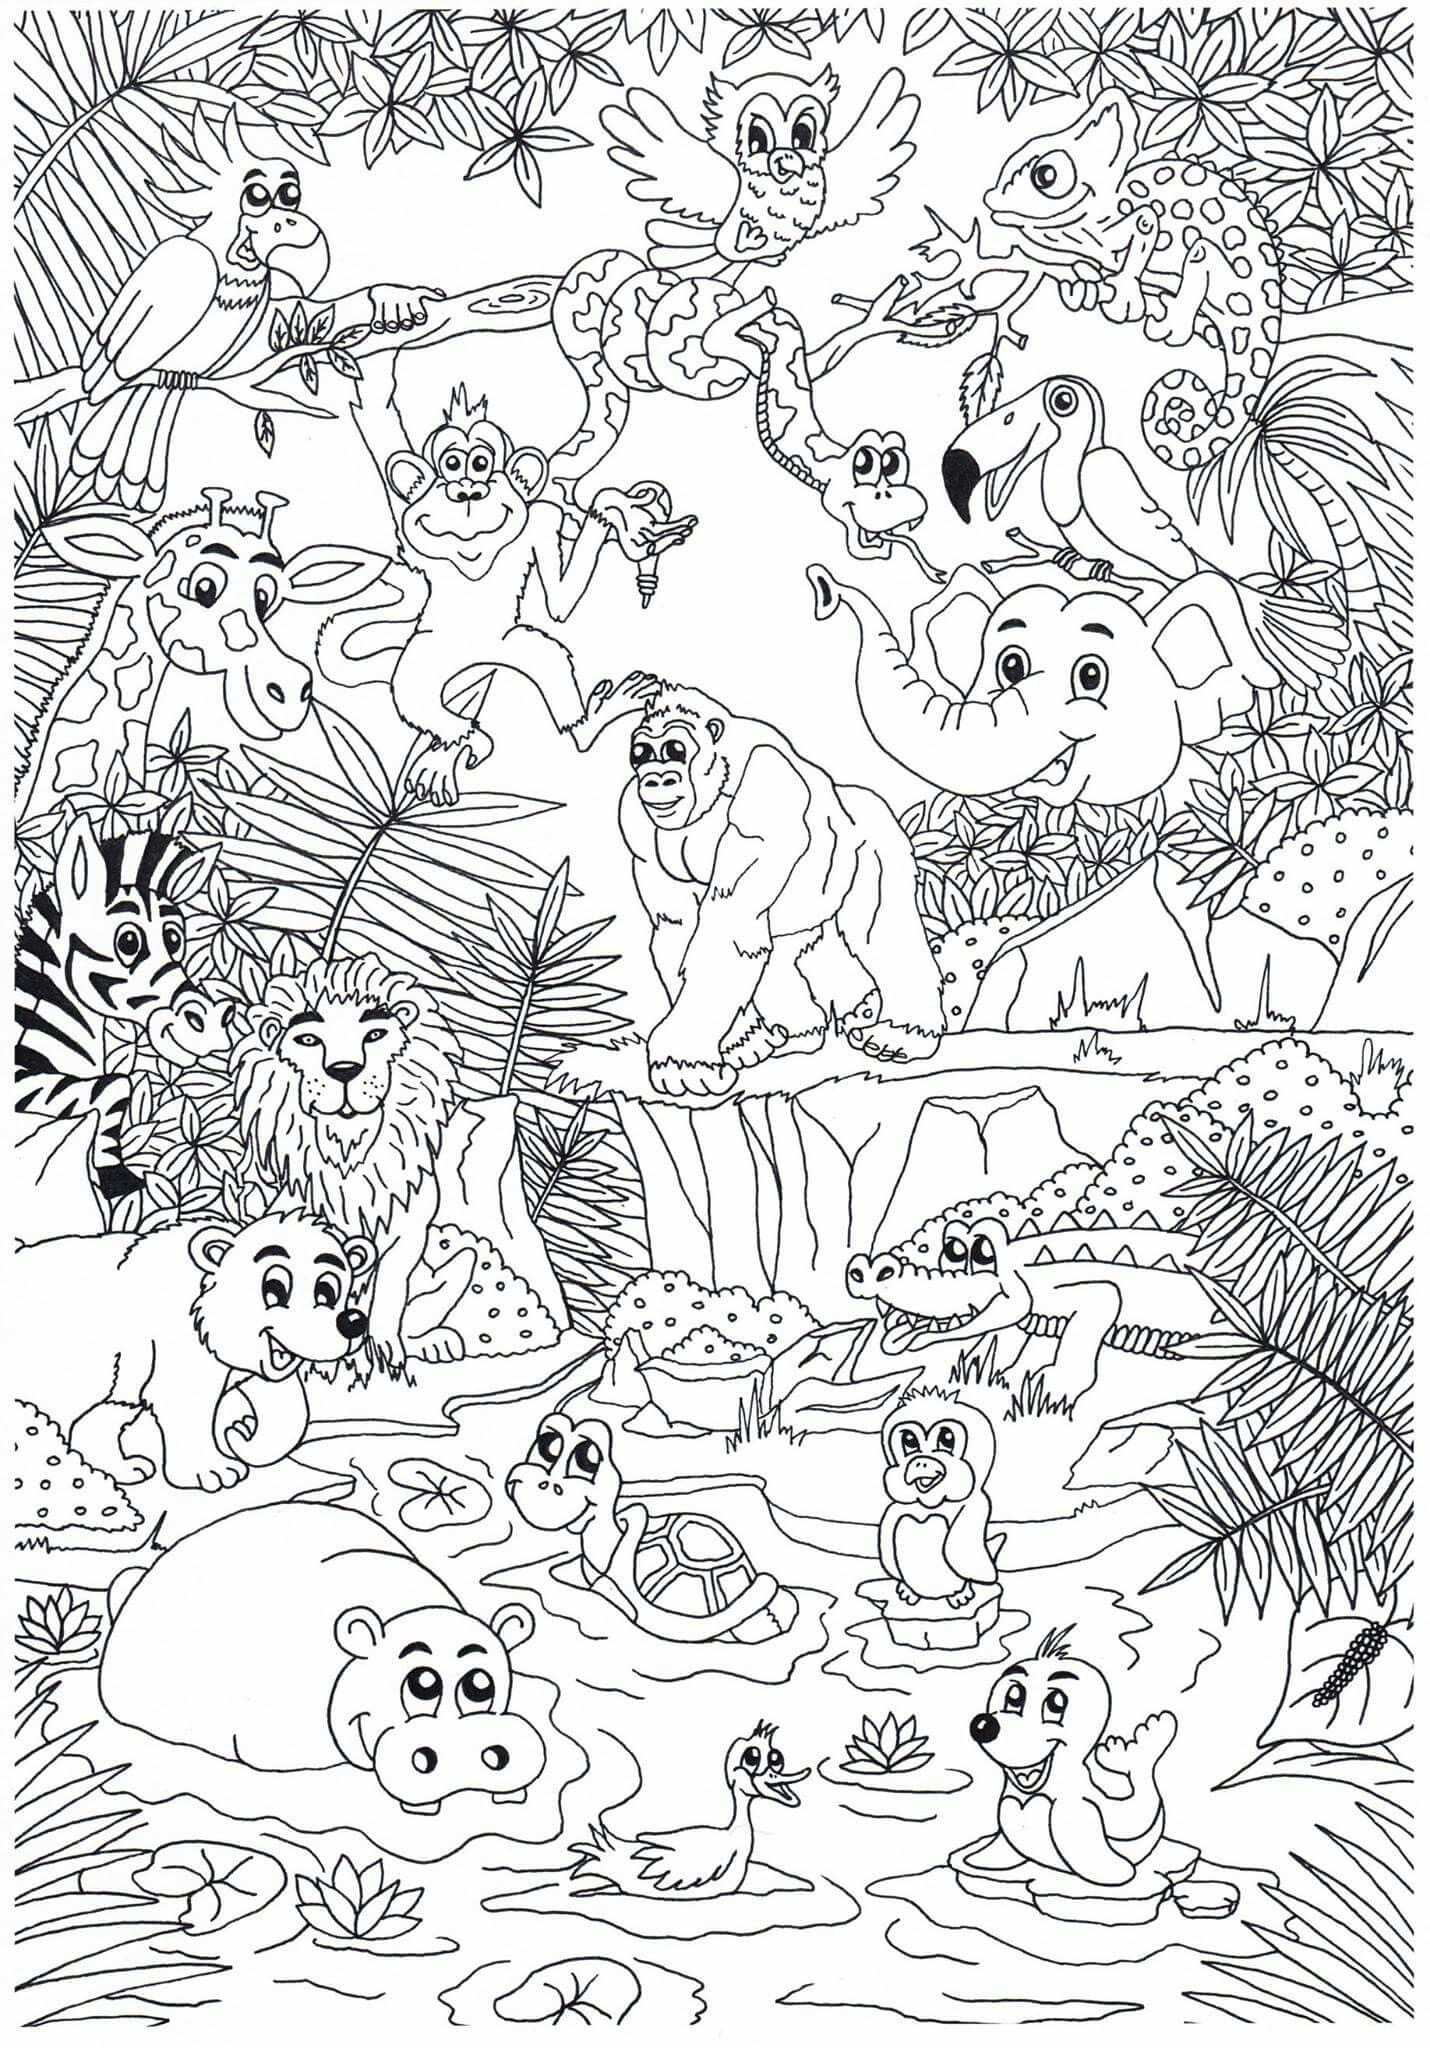 Dierentuin Zoo Animals Click The Pict Or Link To See And Download Another Coloring Pa